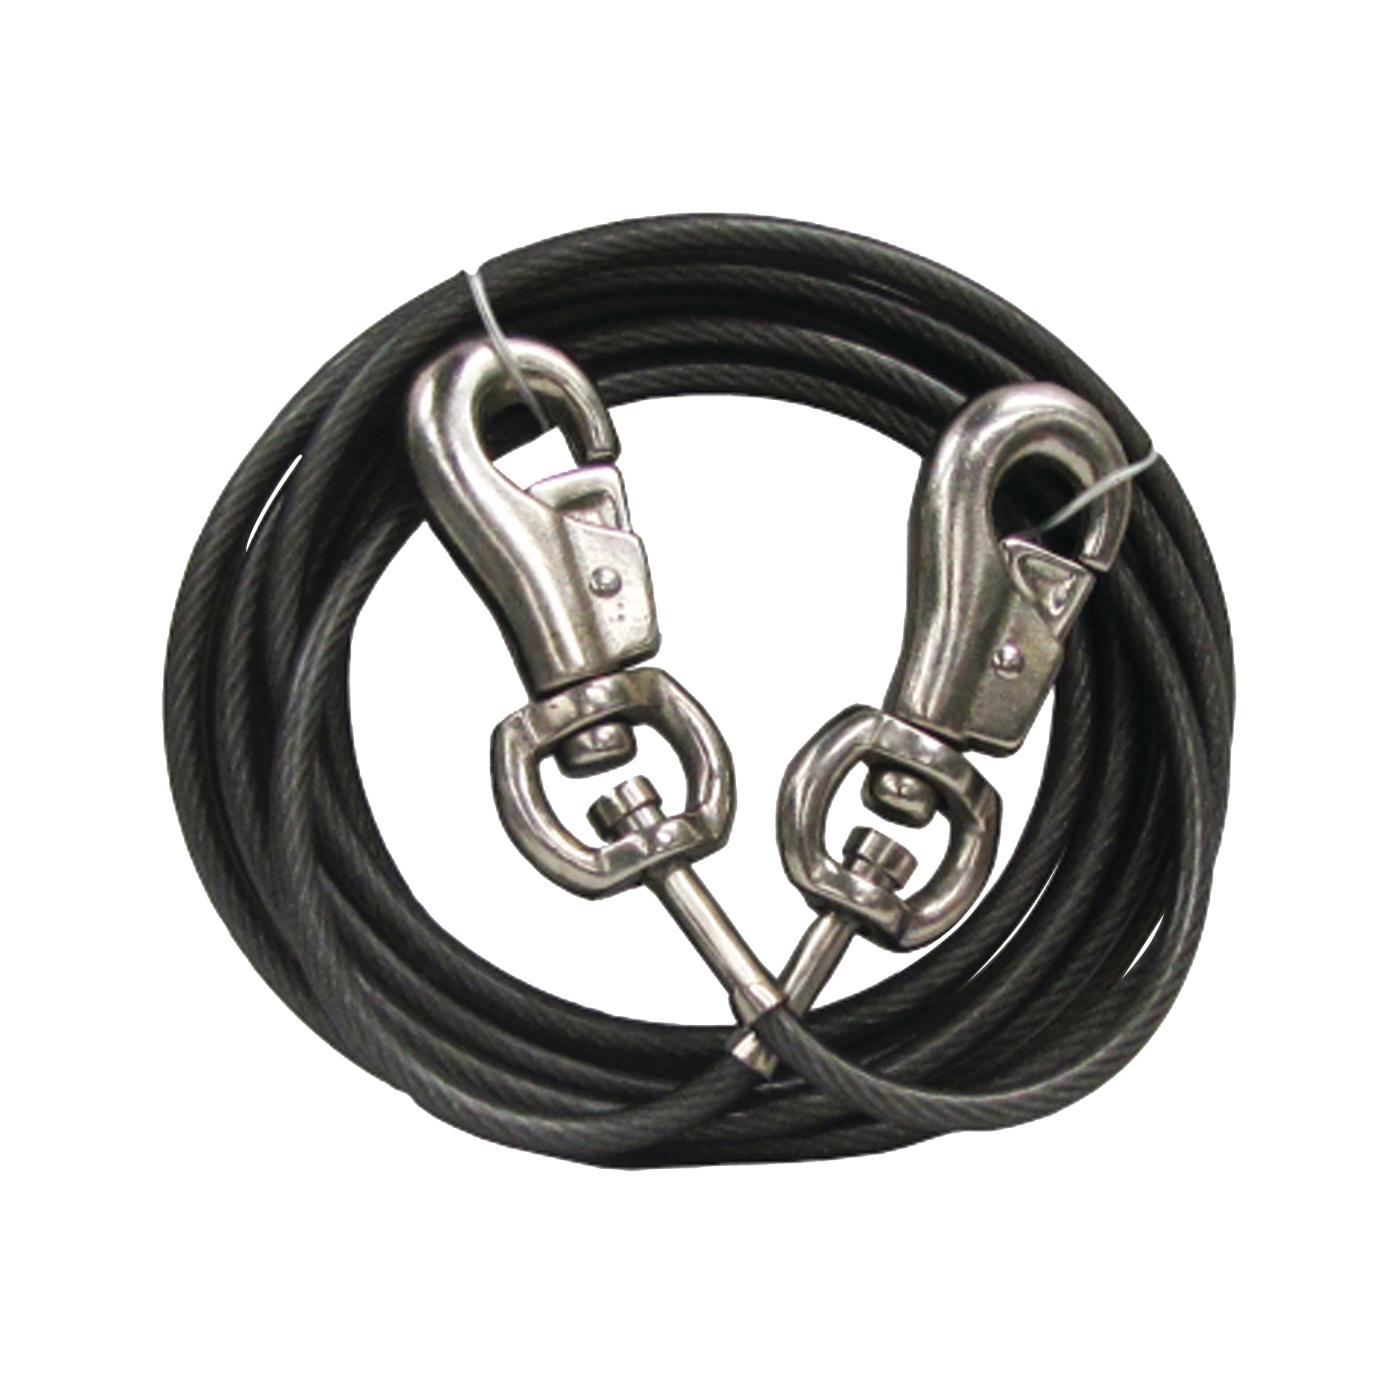 PDQ Q683000099 Super Beast Tie-Out, 30 ft L Belt/Cable, For: Dogs Up to 125 lb